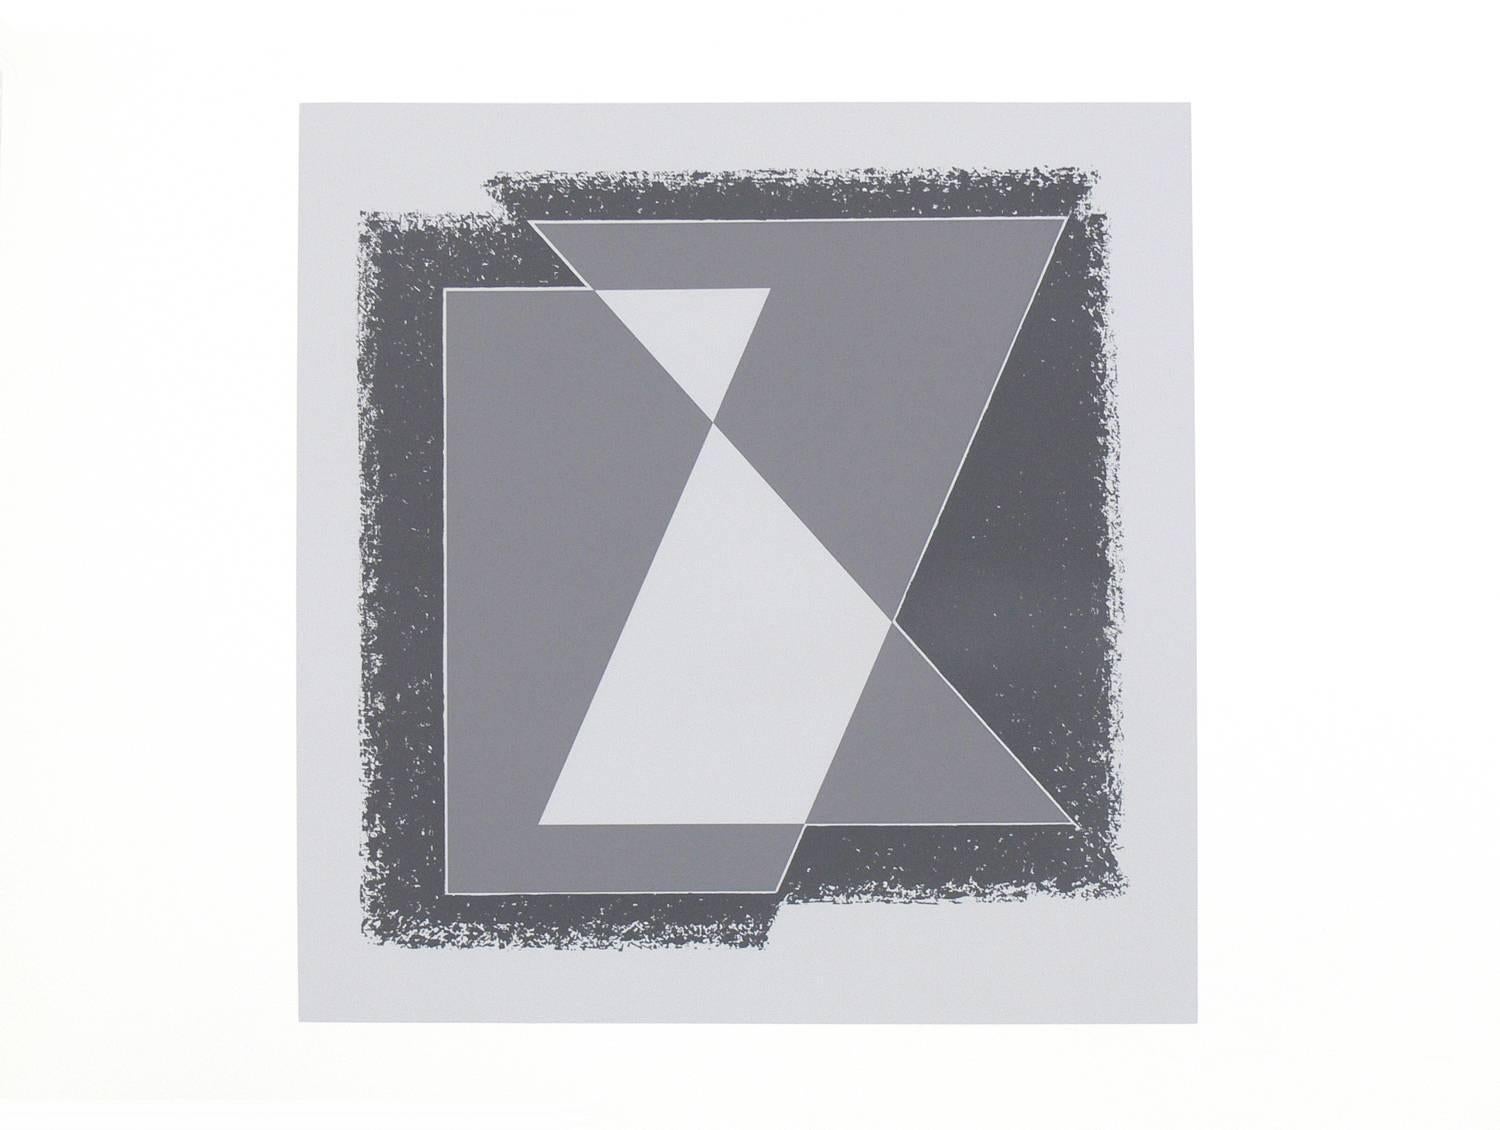 Josef Albers abstract lithographs from Formulation and Articulation, published by Harry N. Abrams Inc., New York, and Ives Sillman Inc., New Haven, circa 1972. These works are from Portfolio II, folder 30. They have been framed in clean lined white